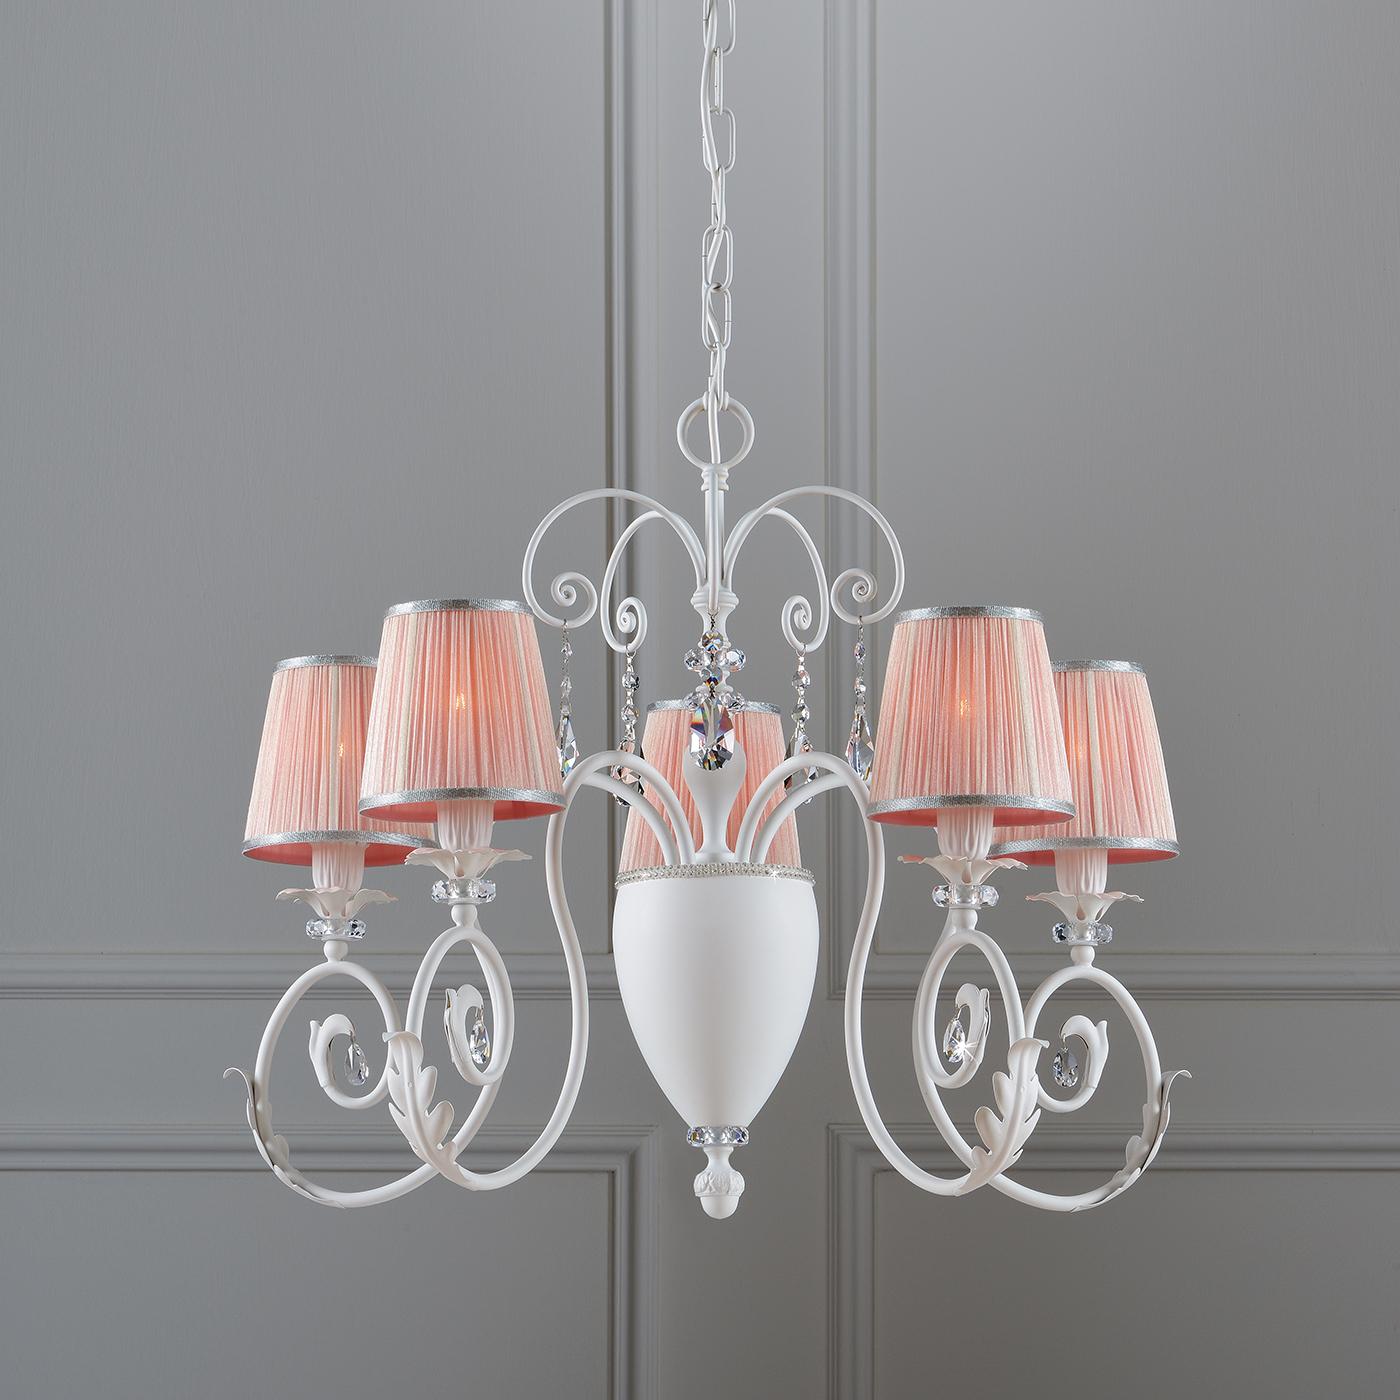 A delicate and elegant chandelier perfect to deliver a great atmospheric illumination. The structure is in white metal characterized by some crystal ornaments. The organdy lampshades in pink create a bit of contrast with the white structure which is